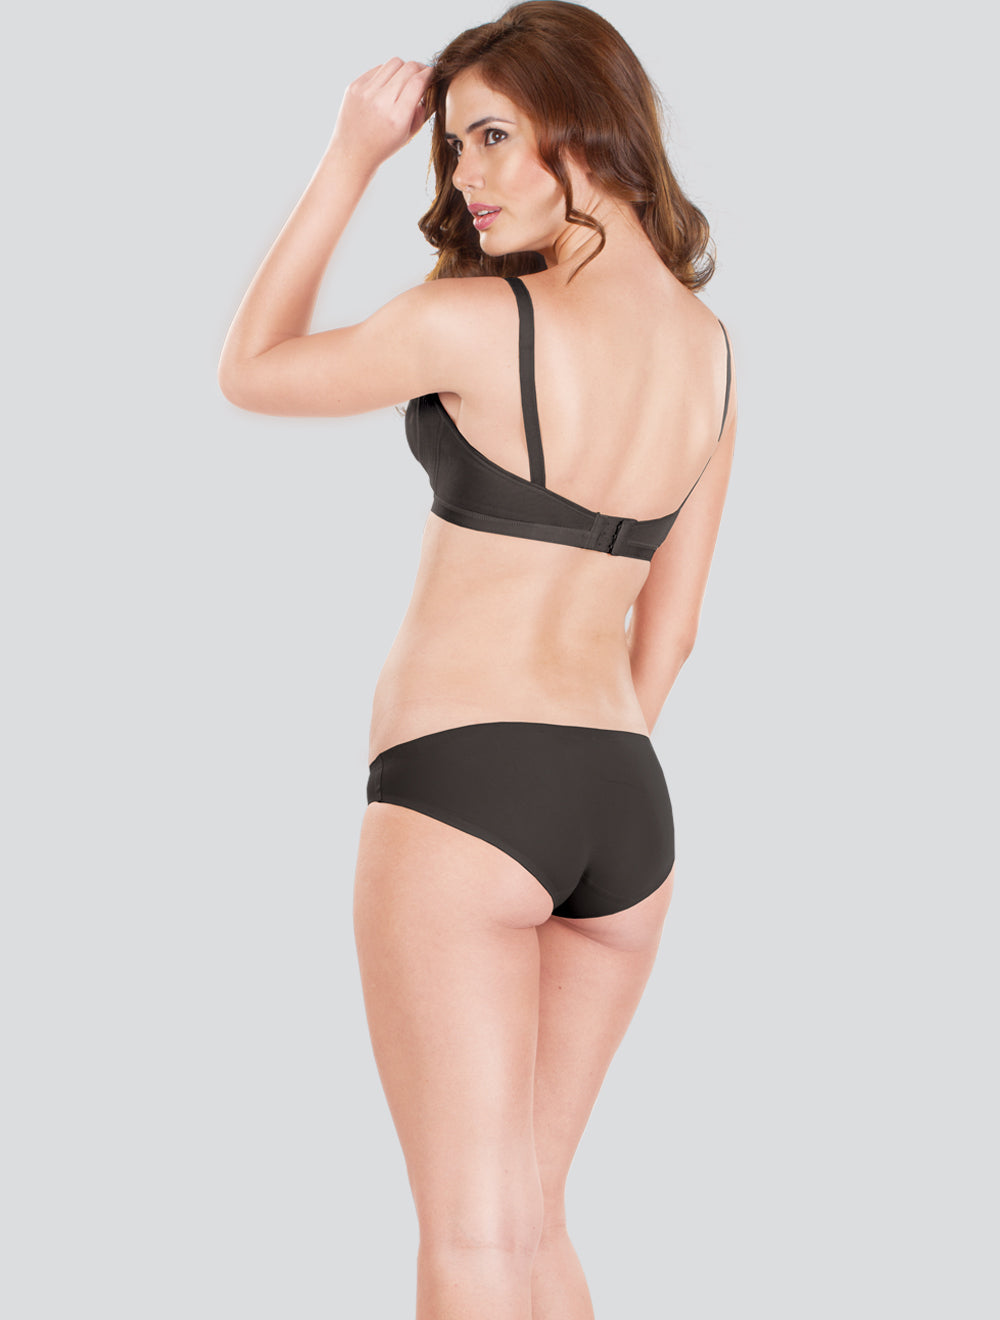 dermawear Ally Women Push-up Non Padded Bra - Buy dermawear Ally Women  Push-up Non Padded Bra Online at Best Prices in India